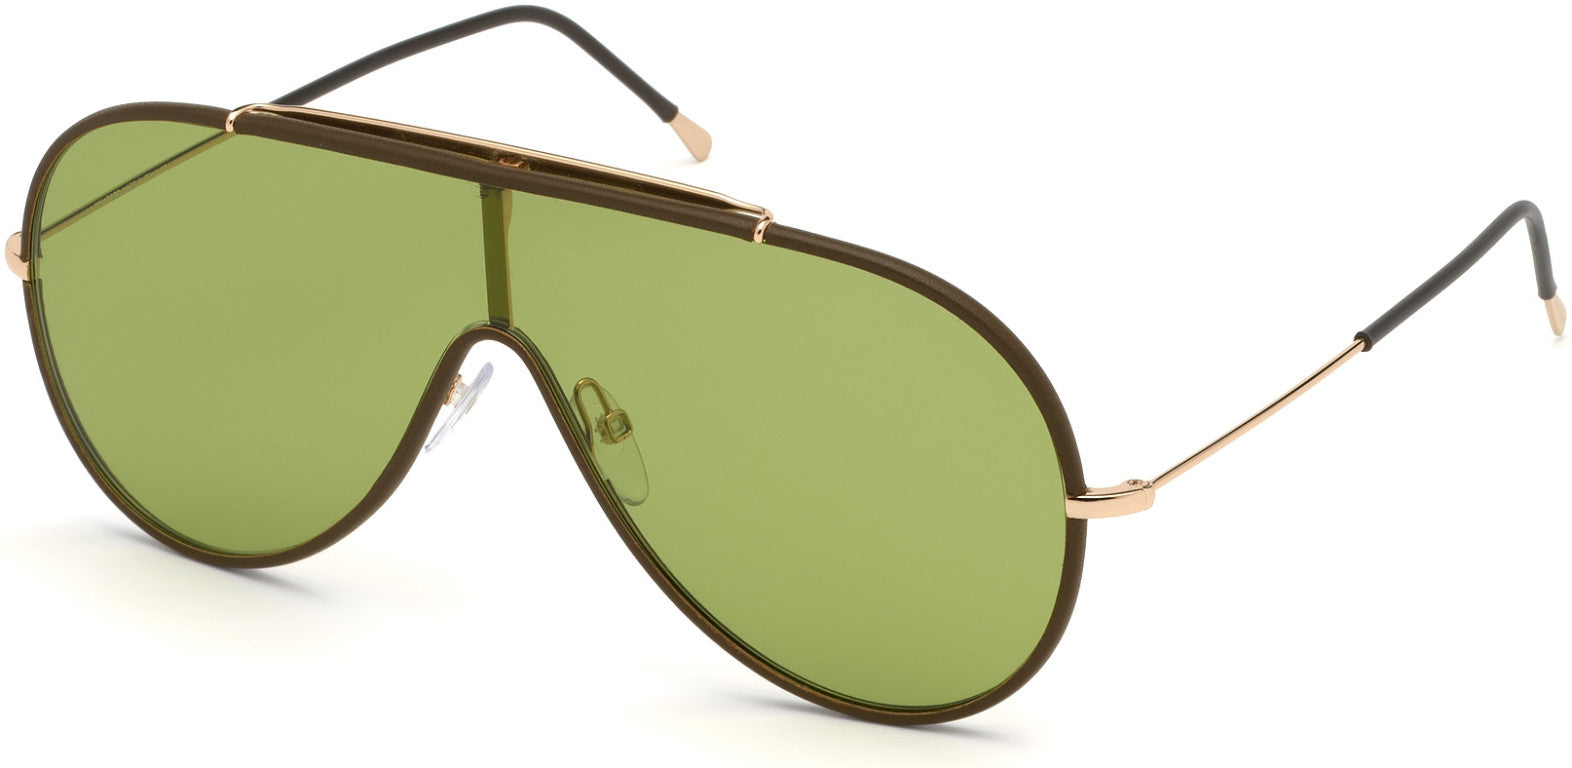 Tom Ford FT0671 Mack Round Sunglasses 48N-48N - Shiny Rose Gold W. Brown Leather Rims / Green Lenses